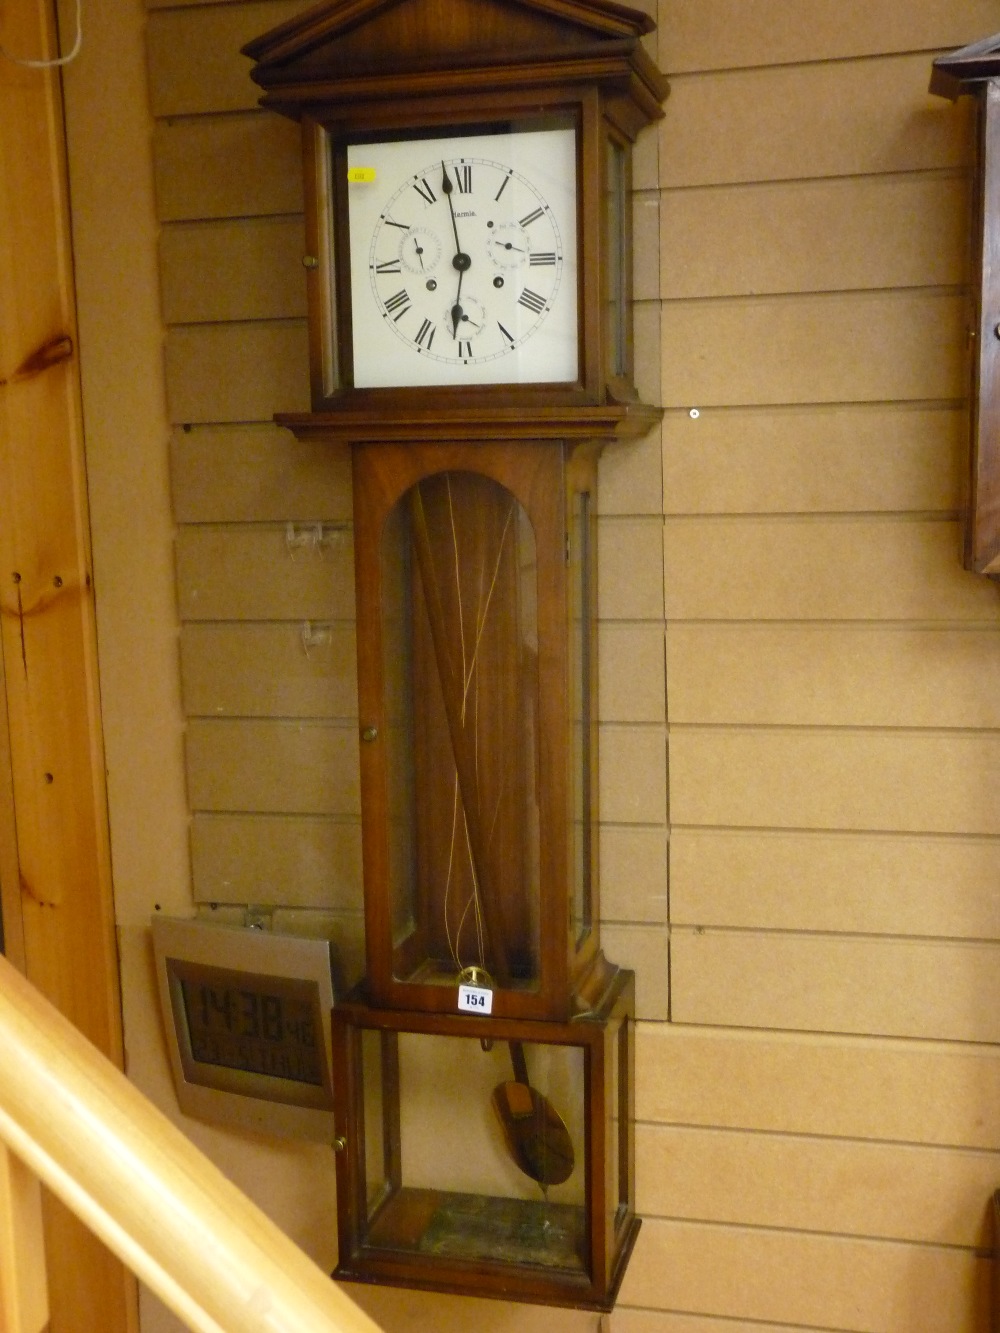 Reproduction wall clock by Hearmle, 126 cms high overall, with weights